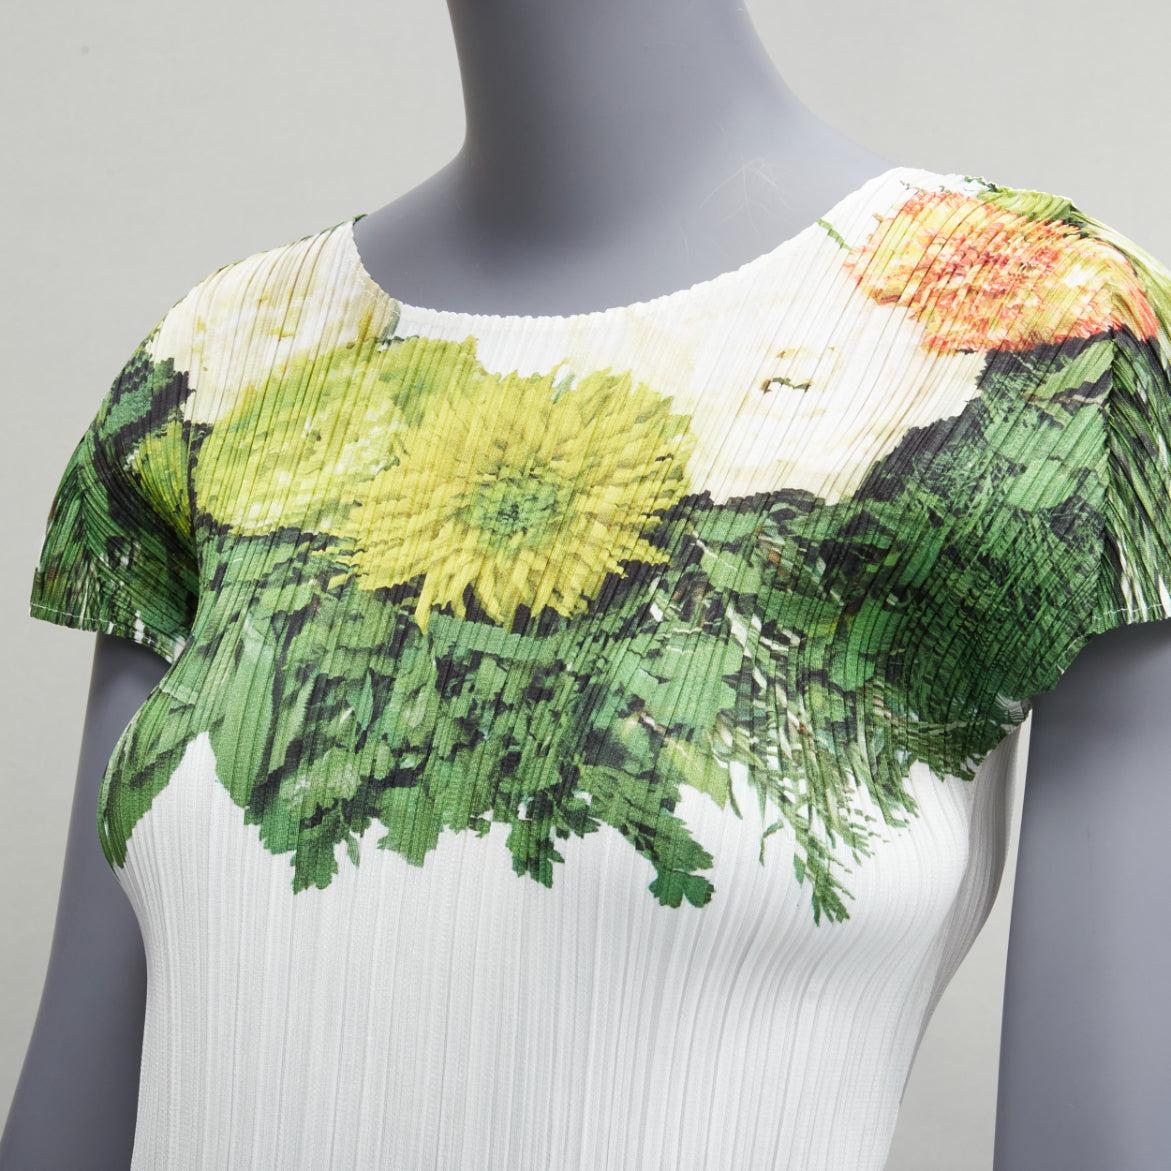 ISSEY MIYAKE Pleats Please cream green bouquet floral neckline plisse top JP3 L
Reference: TGAS/D00517
Brand: Issey Miyake
Collection: Pleats Please
Material: Polyester
Color: Cream, Green
Pattern: Floral
Closure: Pull On
Made in: